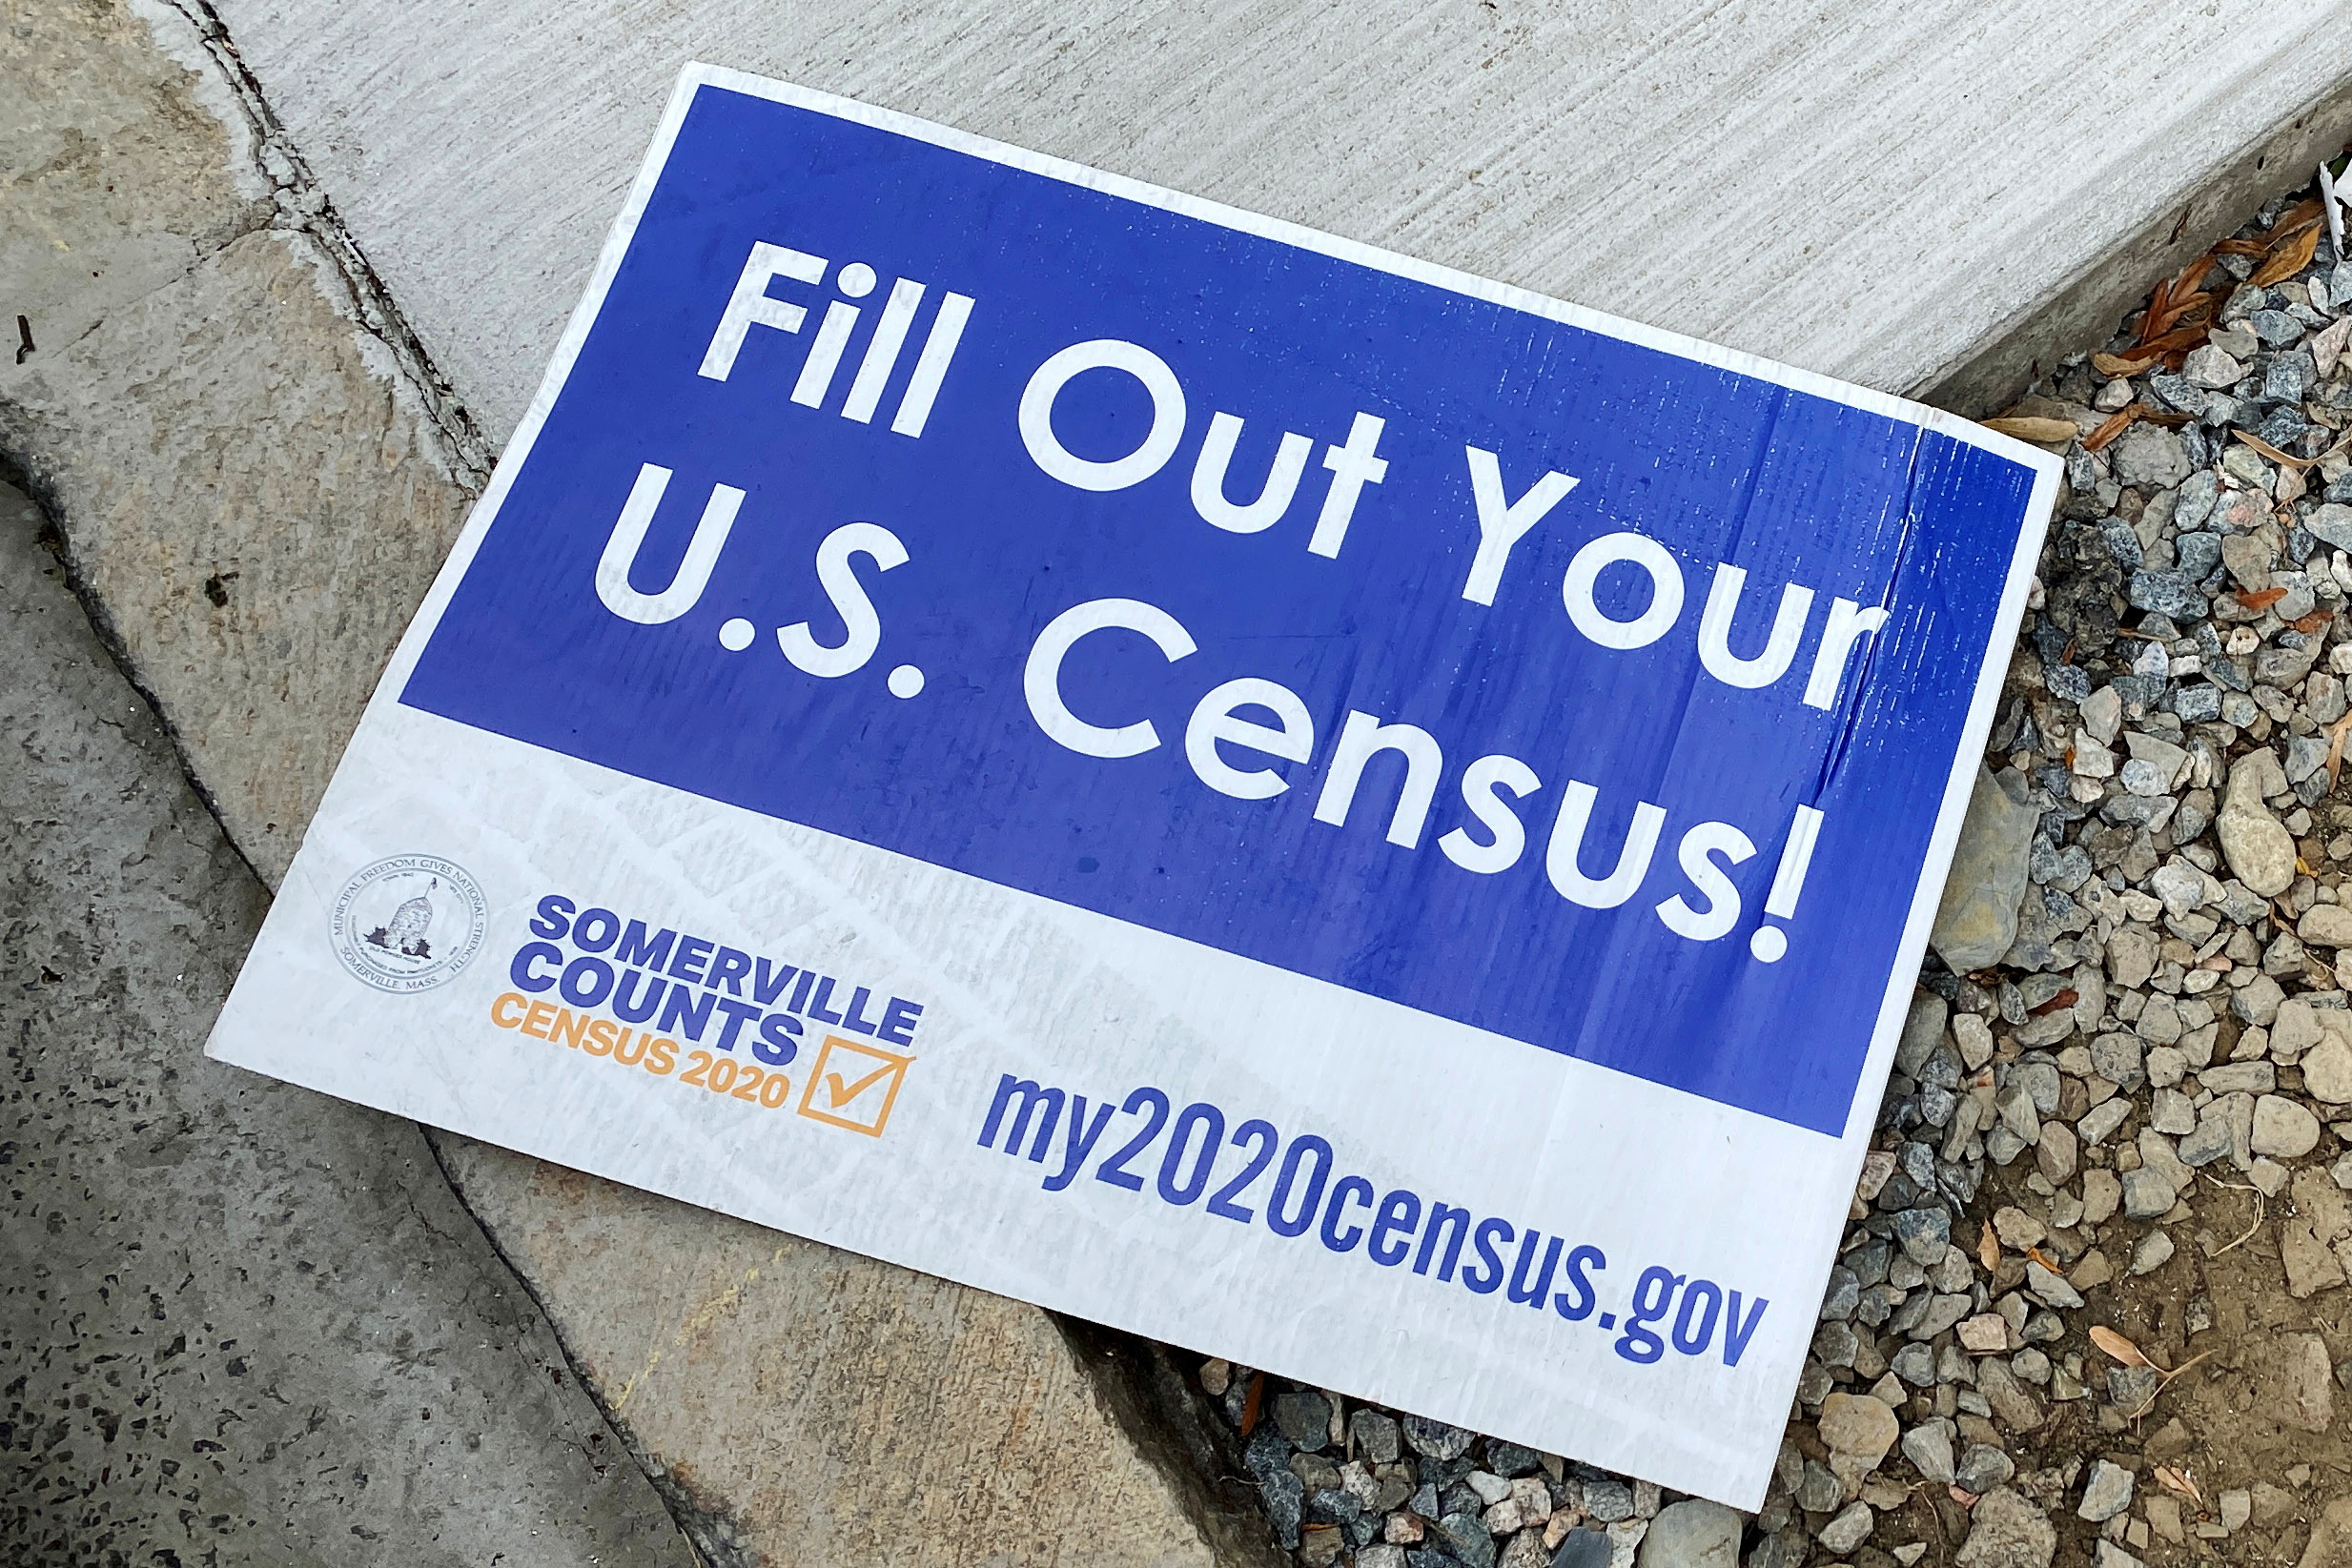 A sign encouraging participation in the U.S. Census lies on a sidewalk in Somerville